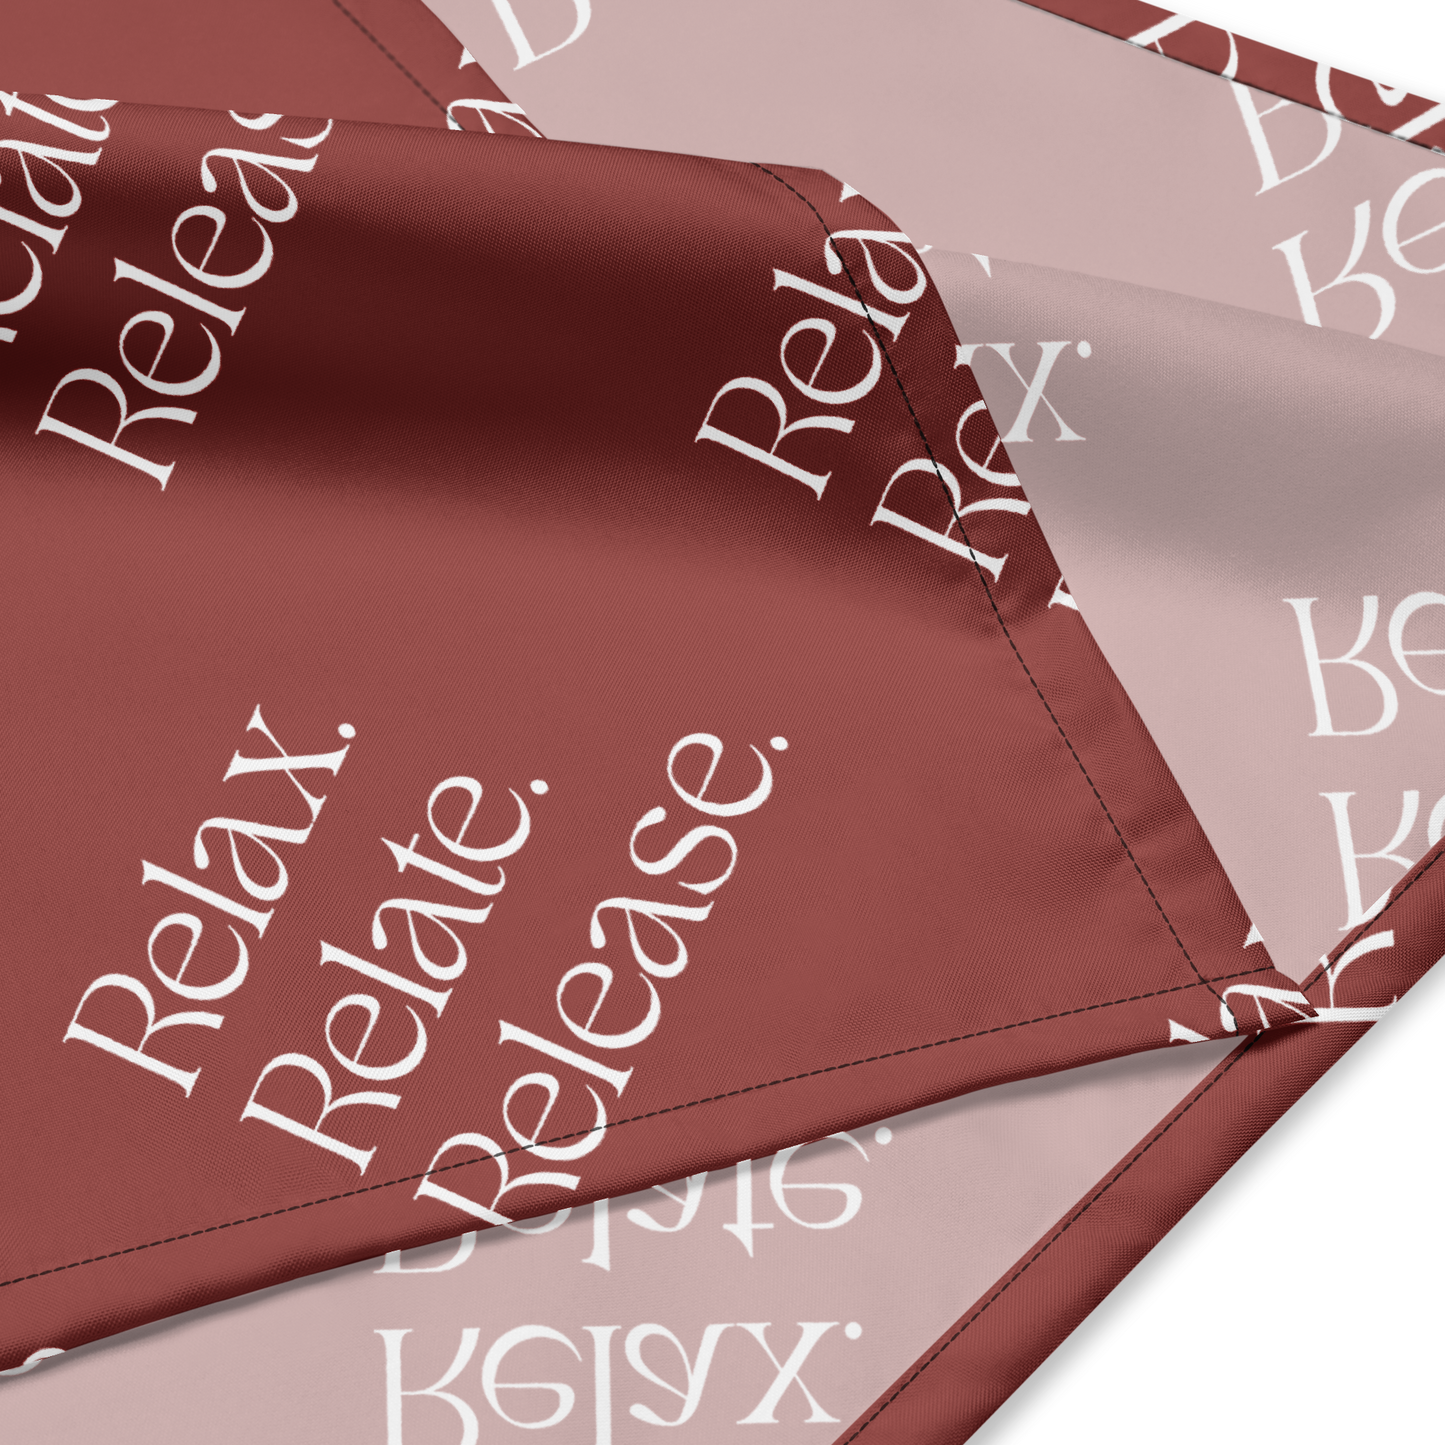 Relax. Relate. Release. Scarf